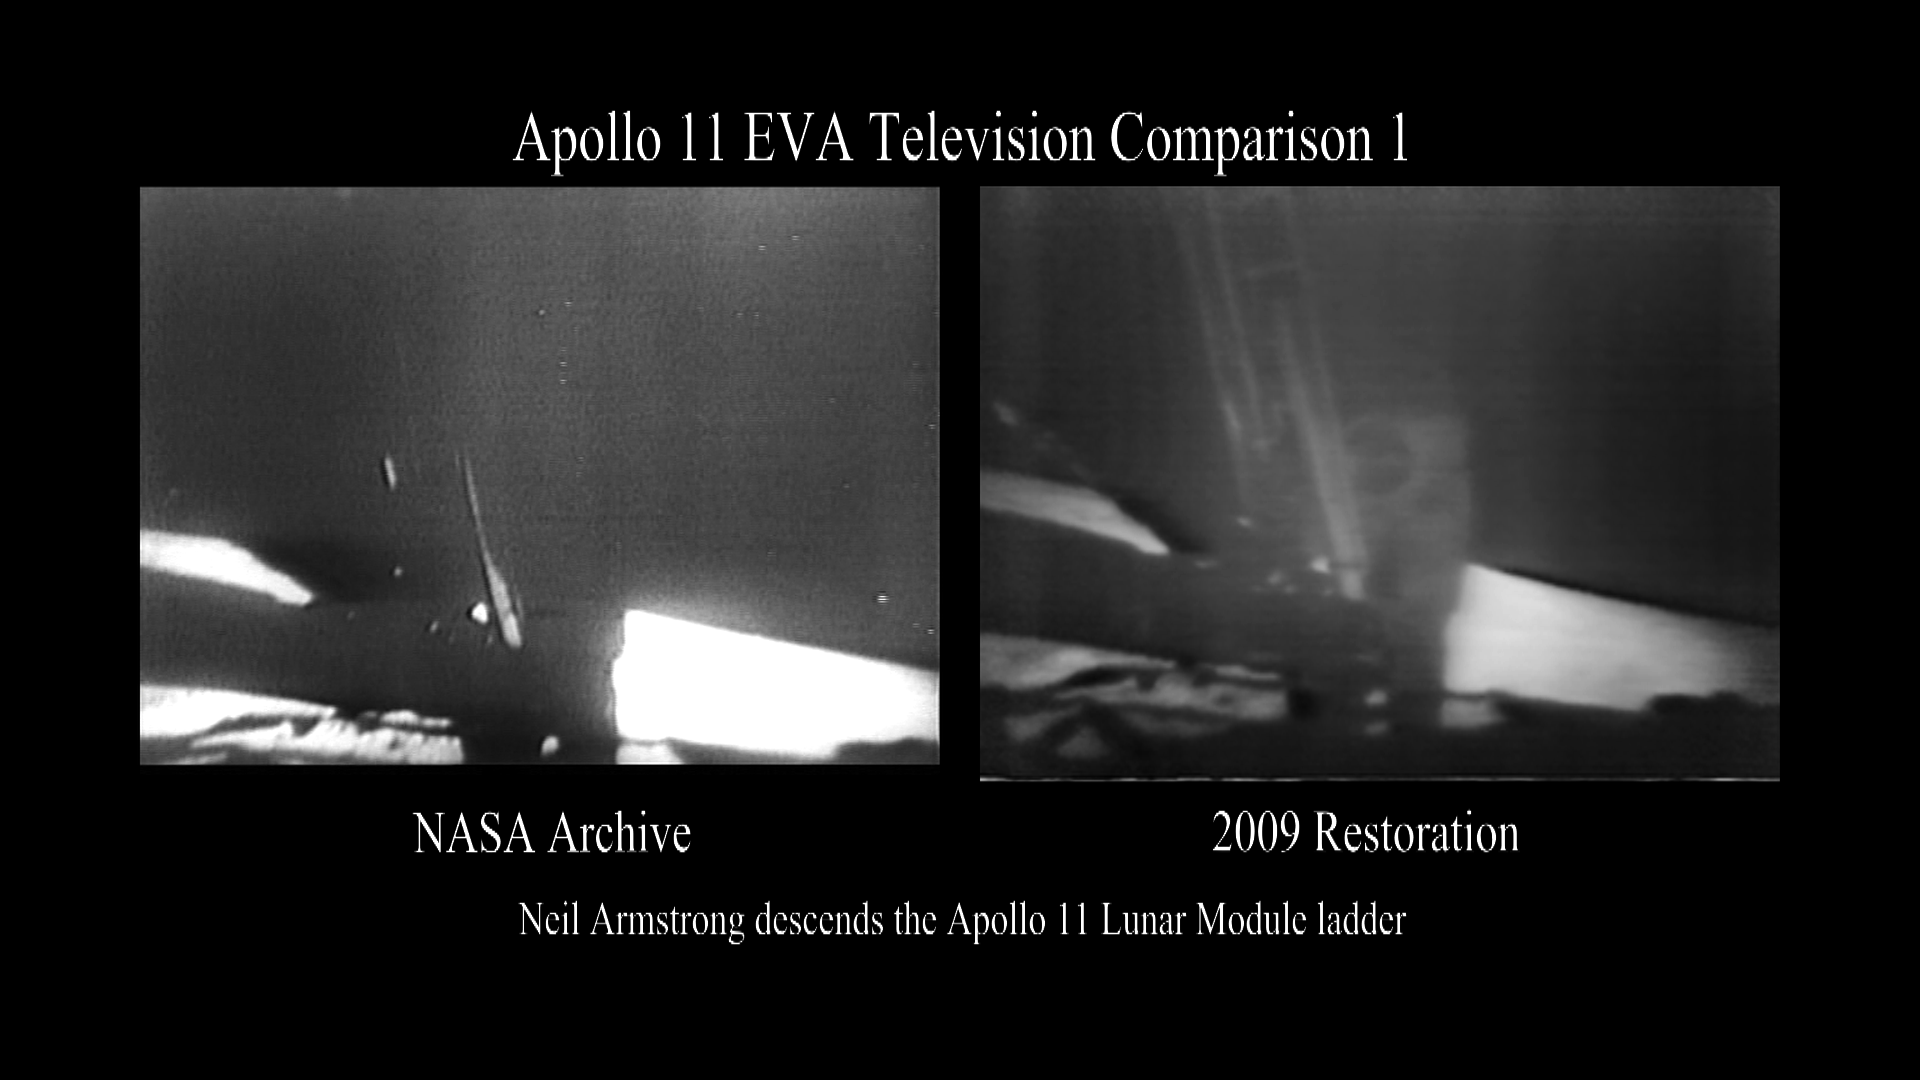 A side by side comparison of the original broadcast video and partially restored video of Neil Armstrong making his way to the lunar surface, by climbing down the lunar module ladder.